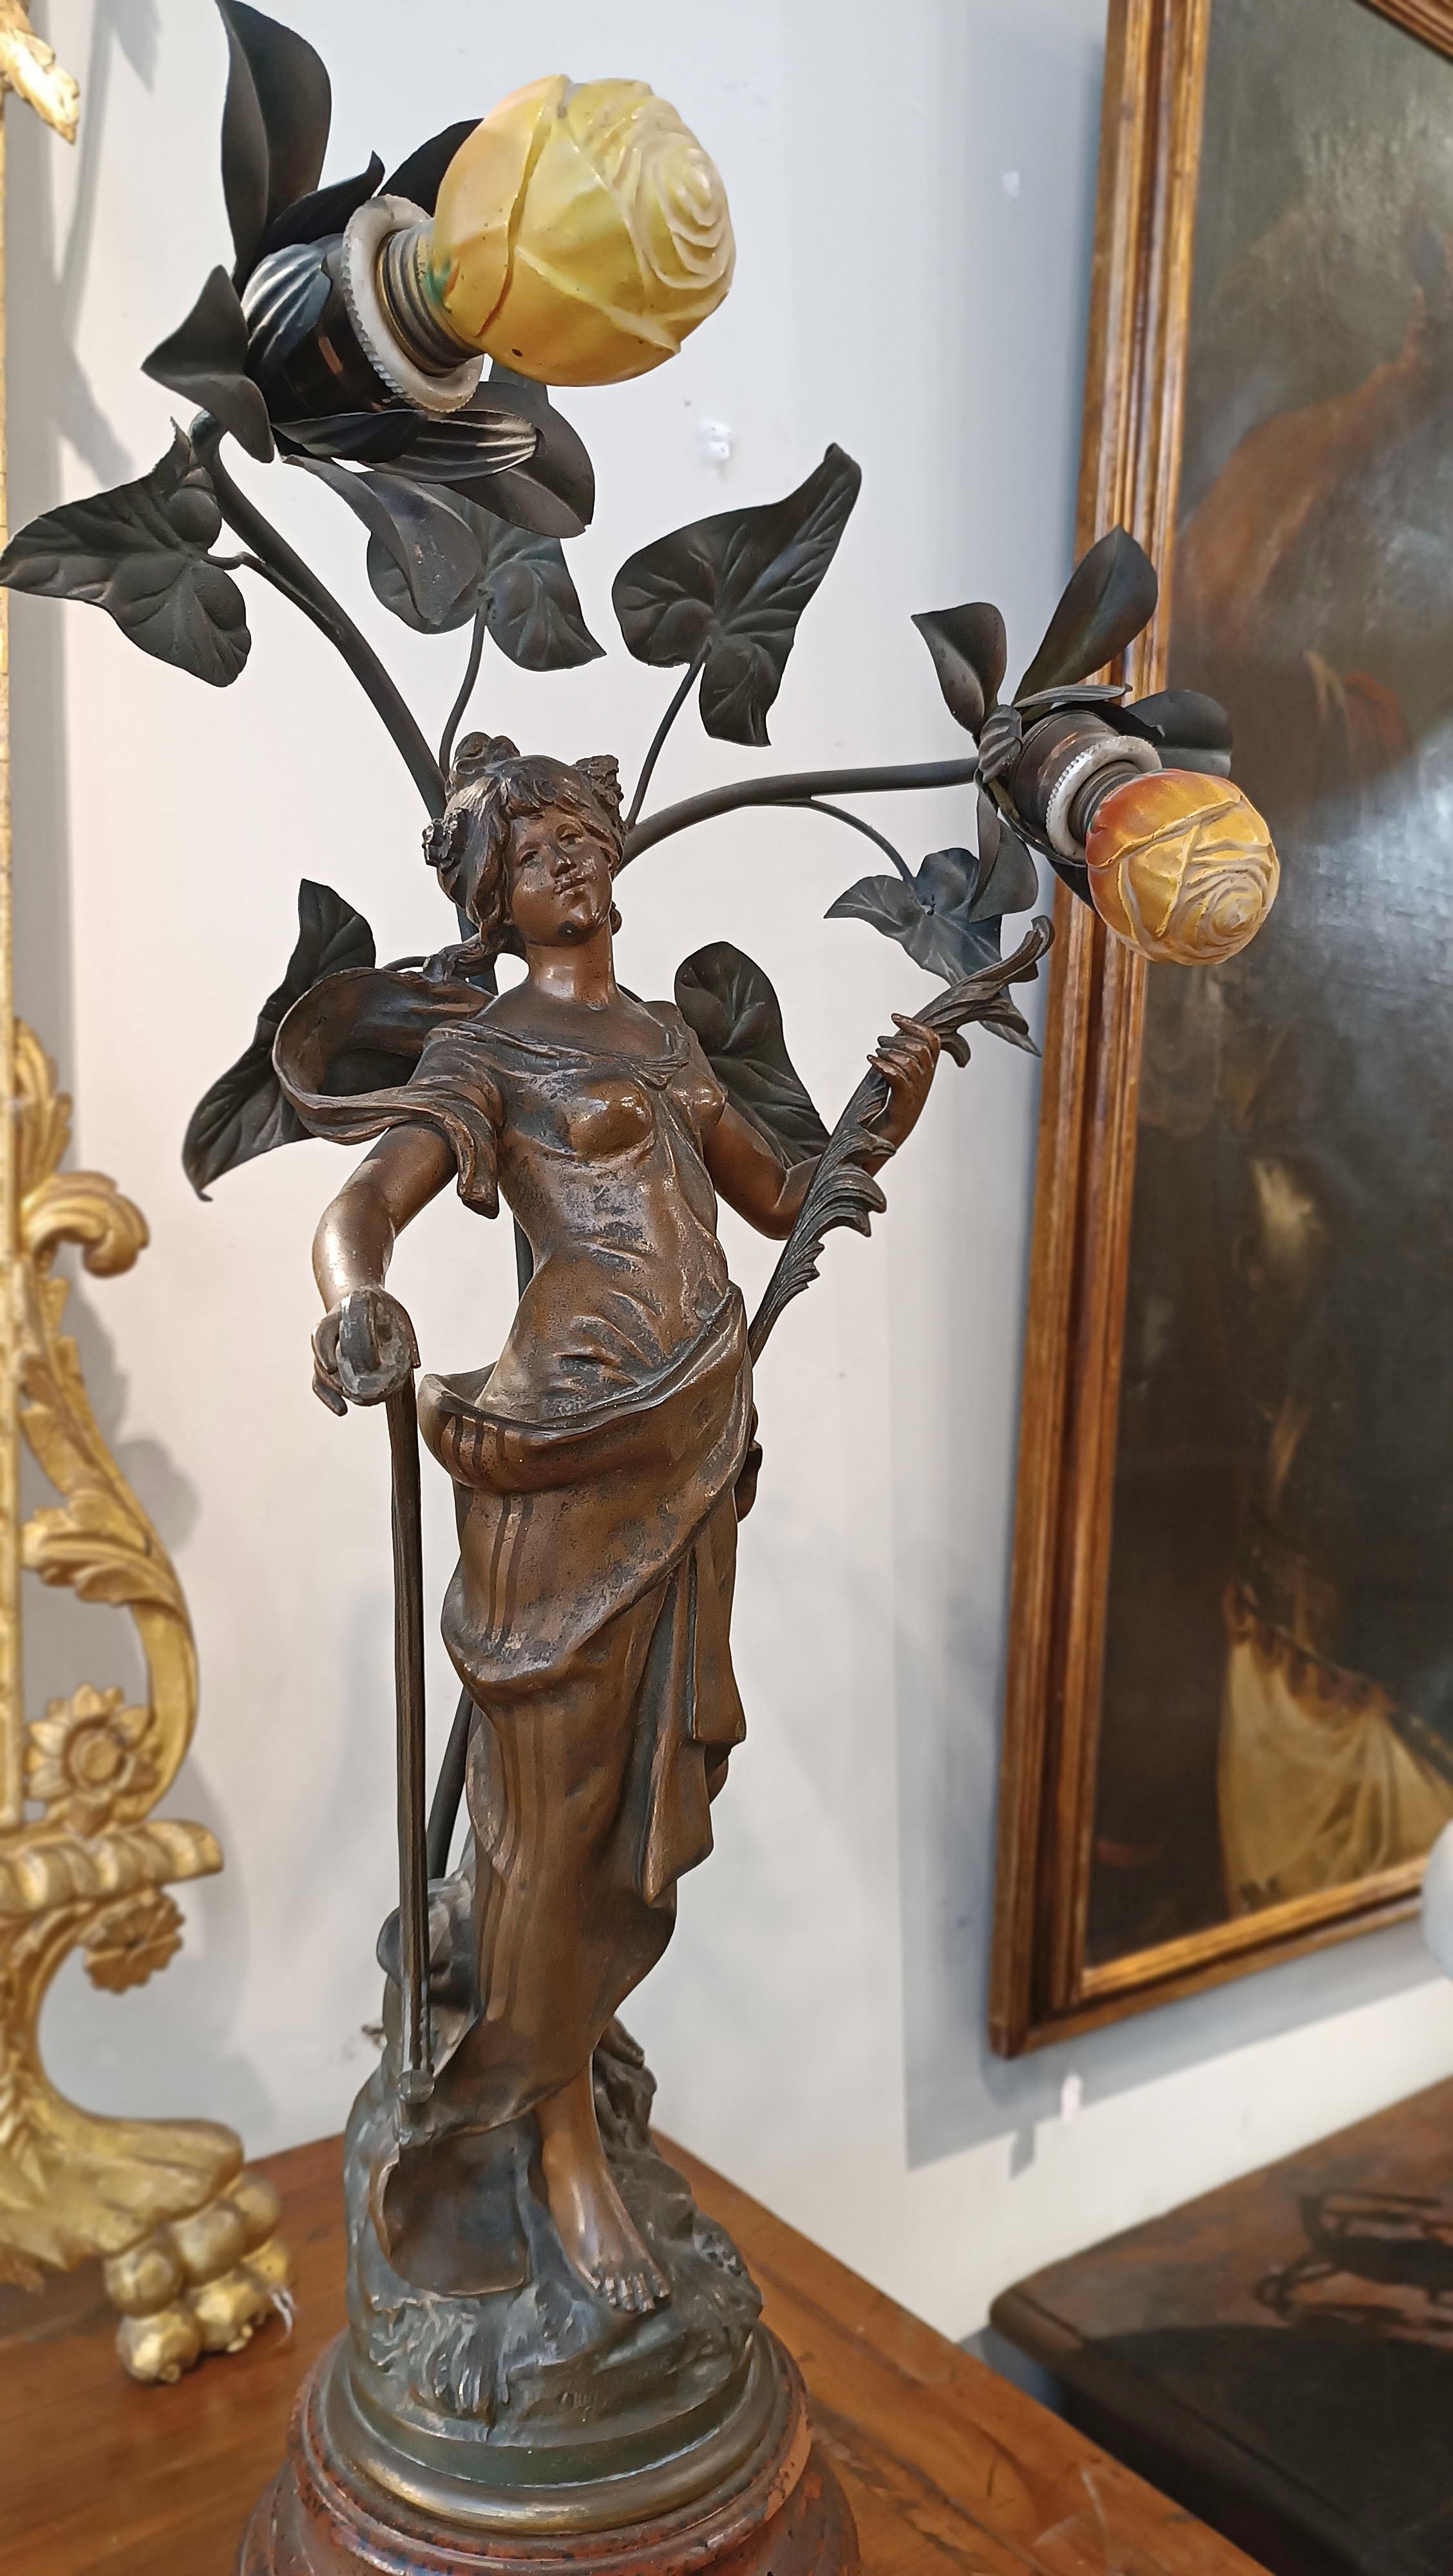 This Liberty lamp in bronze alloy represents a true work of decorative art. The female figure statuette is striking for its grace and delicacy. The woman holds a harp, symbol of harmony and purity, and a palm, which represents victory and nobility